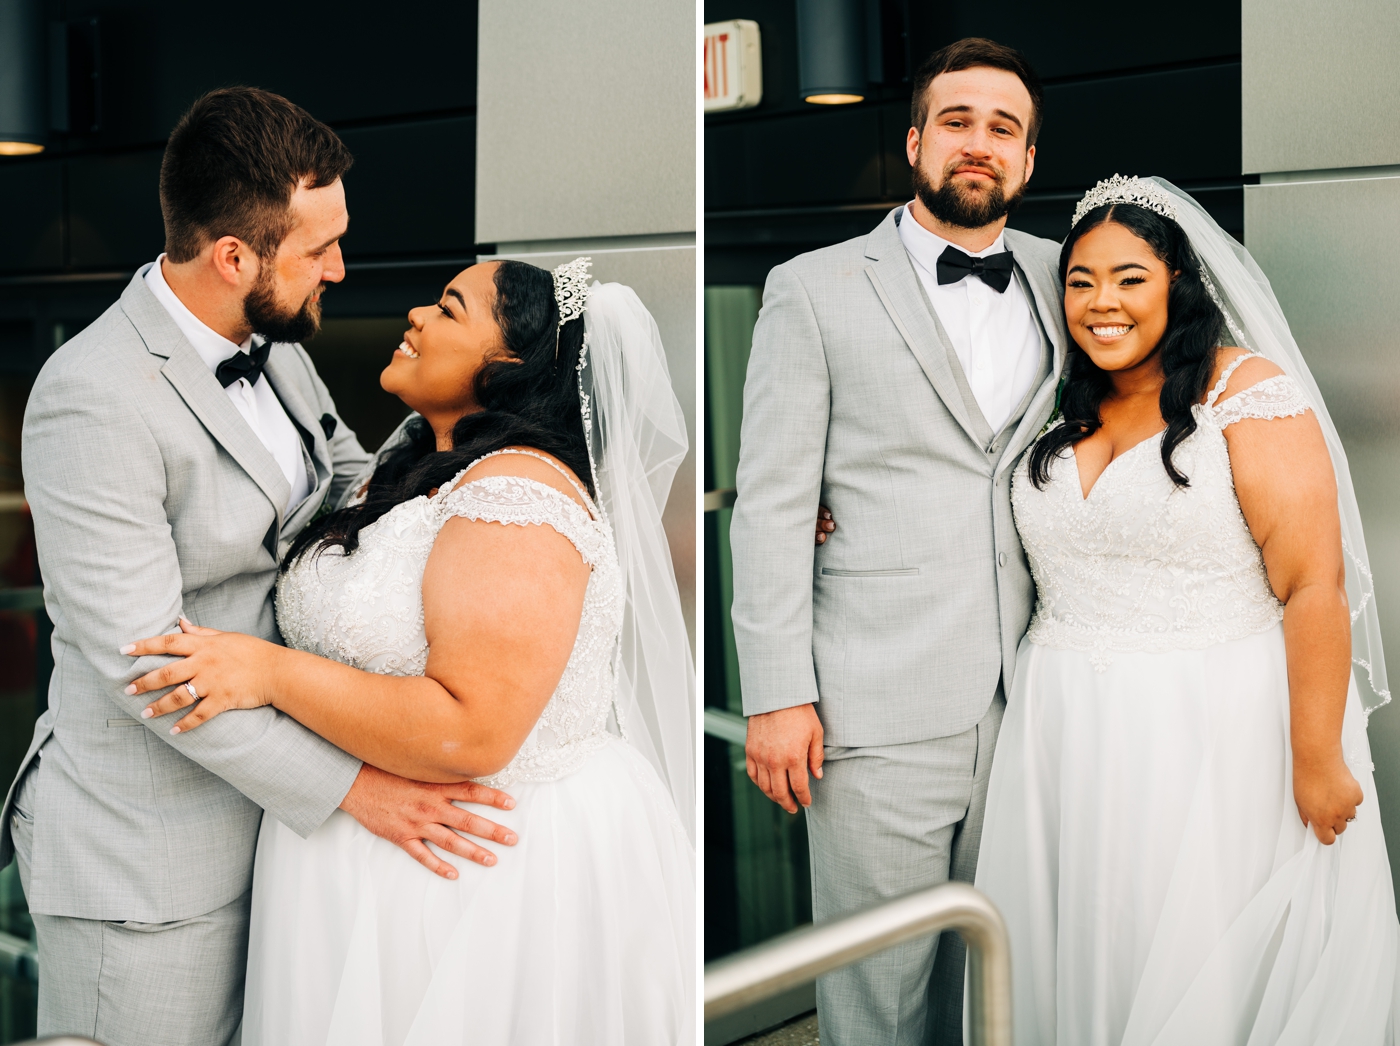 Rooftop photos with bride and groom